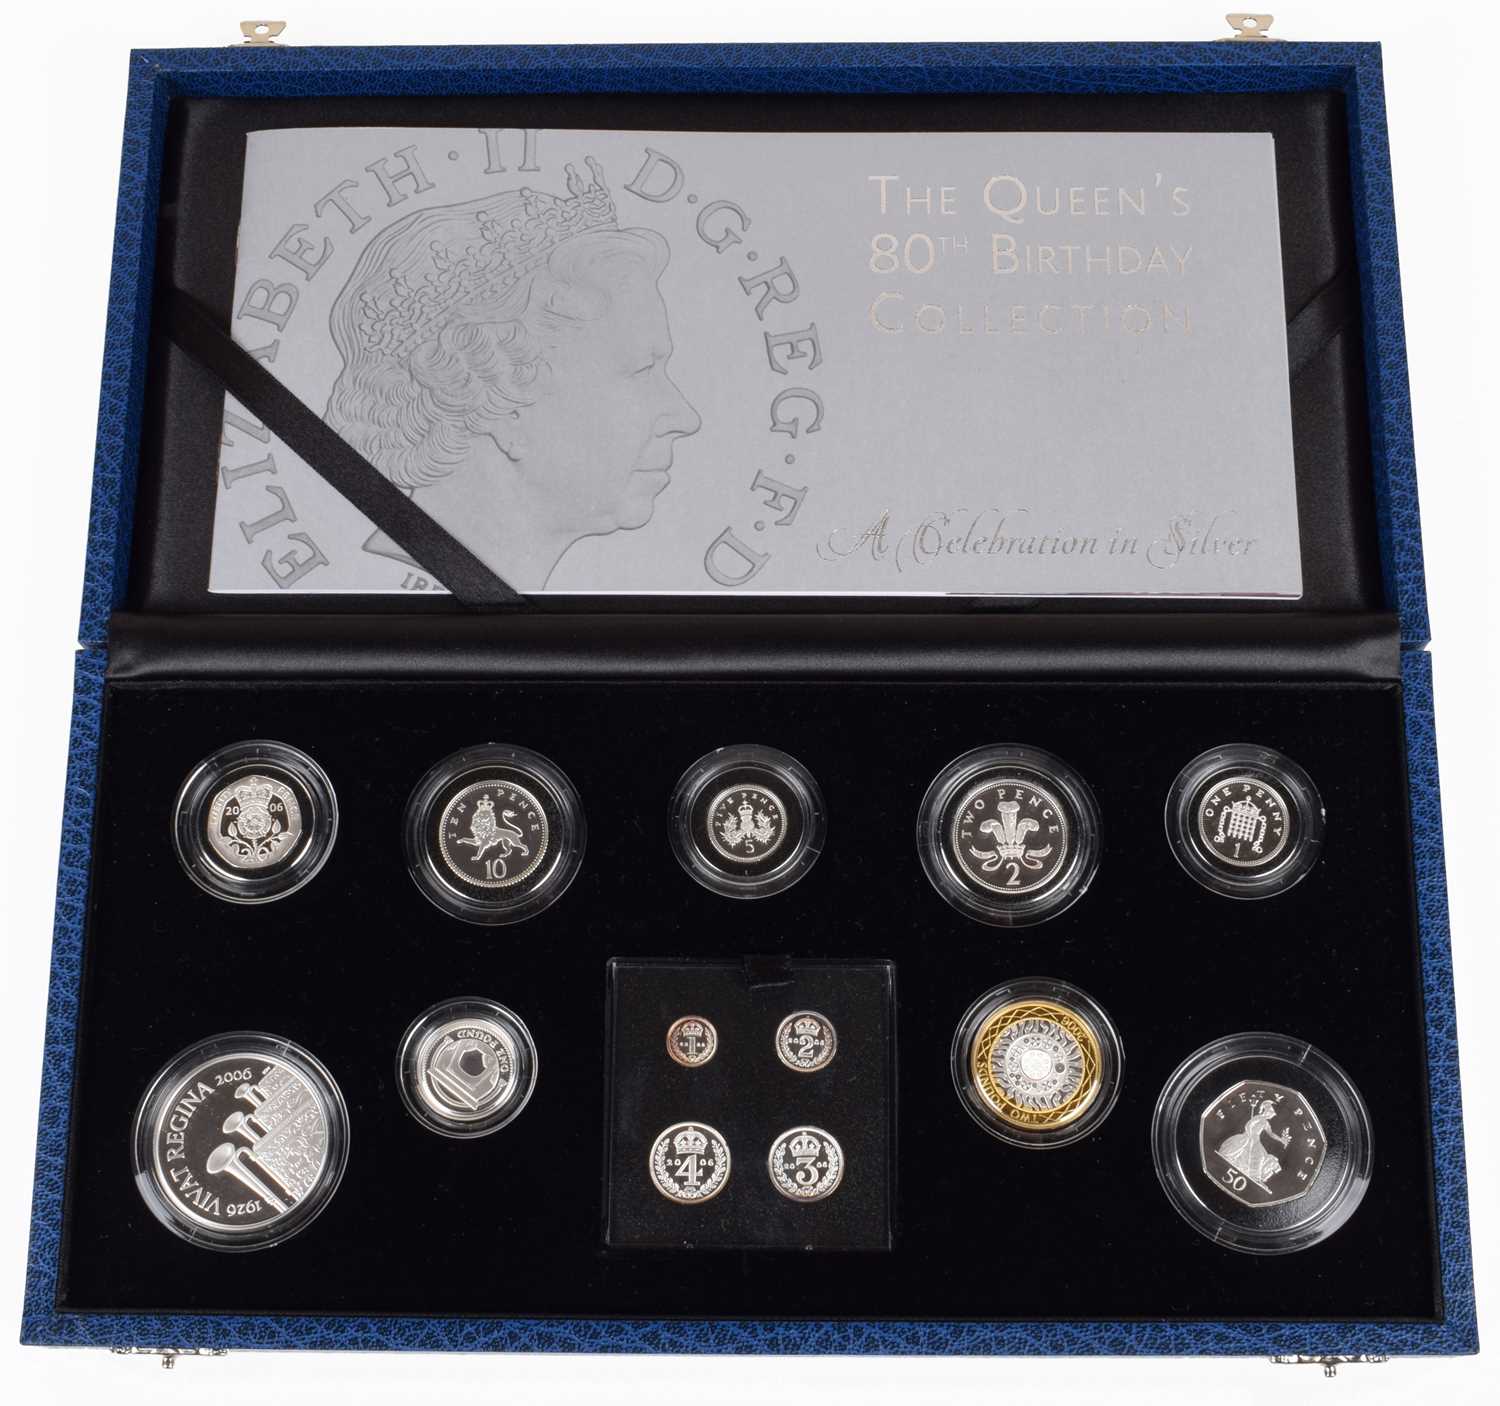 Lot 41 - Royal Mint, "The Queen`s 80th Birthday Collection, A Celebration in Silver" Proof Set, 2006.